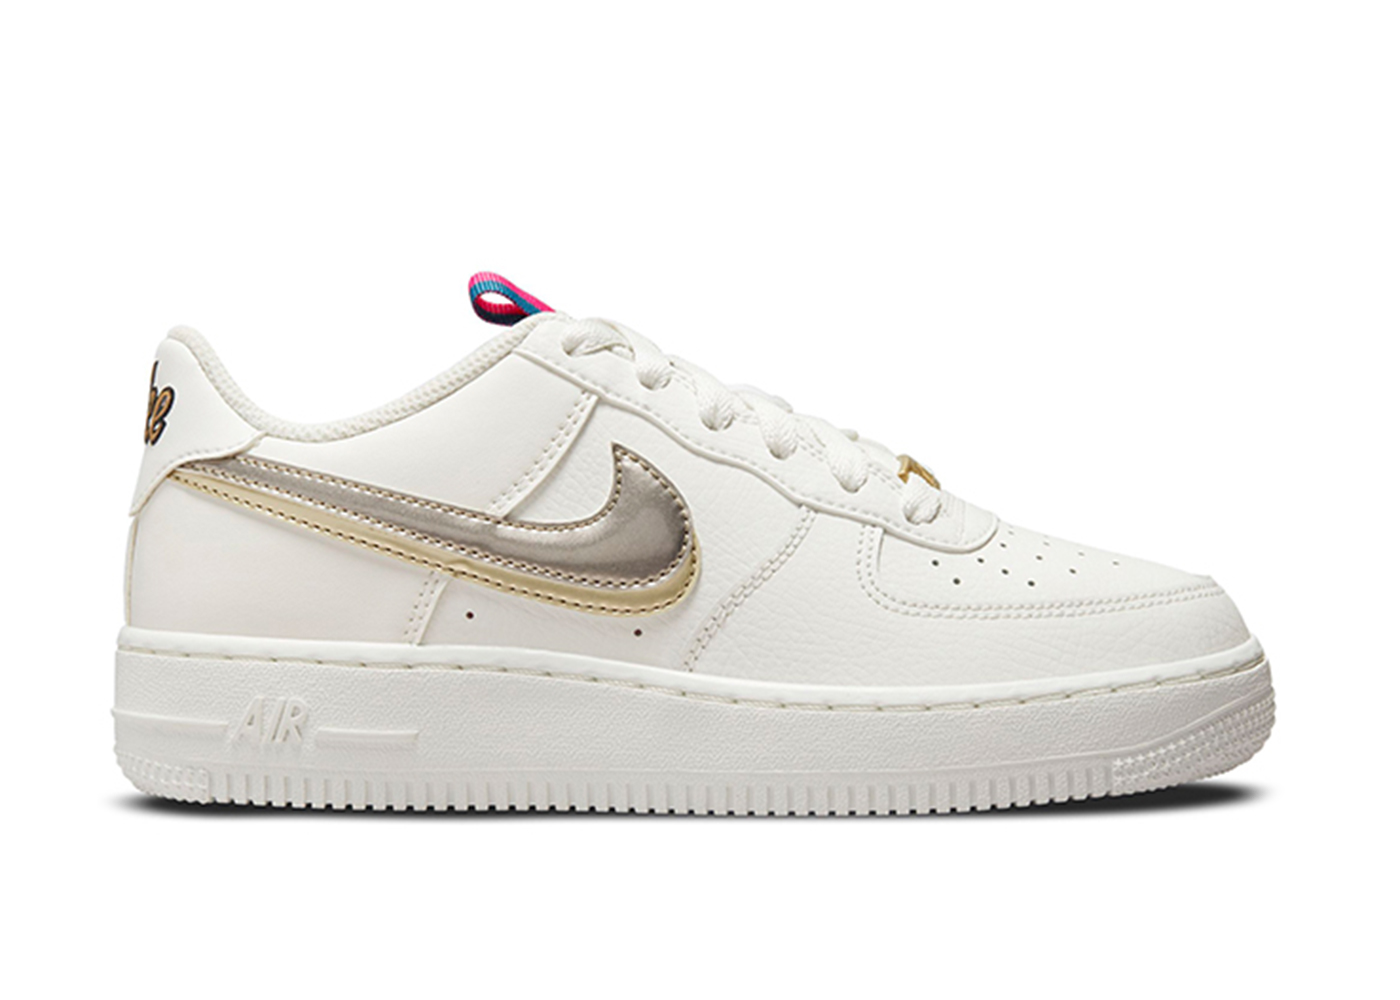 Nike Air Force 1 LV8 Double Swoosh Silver Gold (GS) Kids